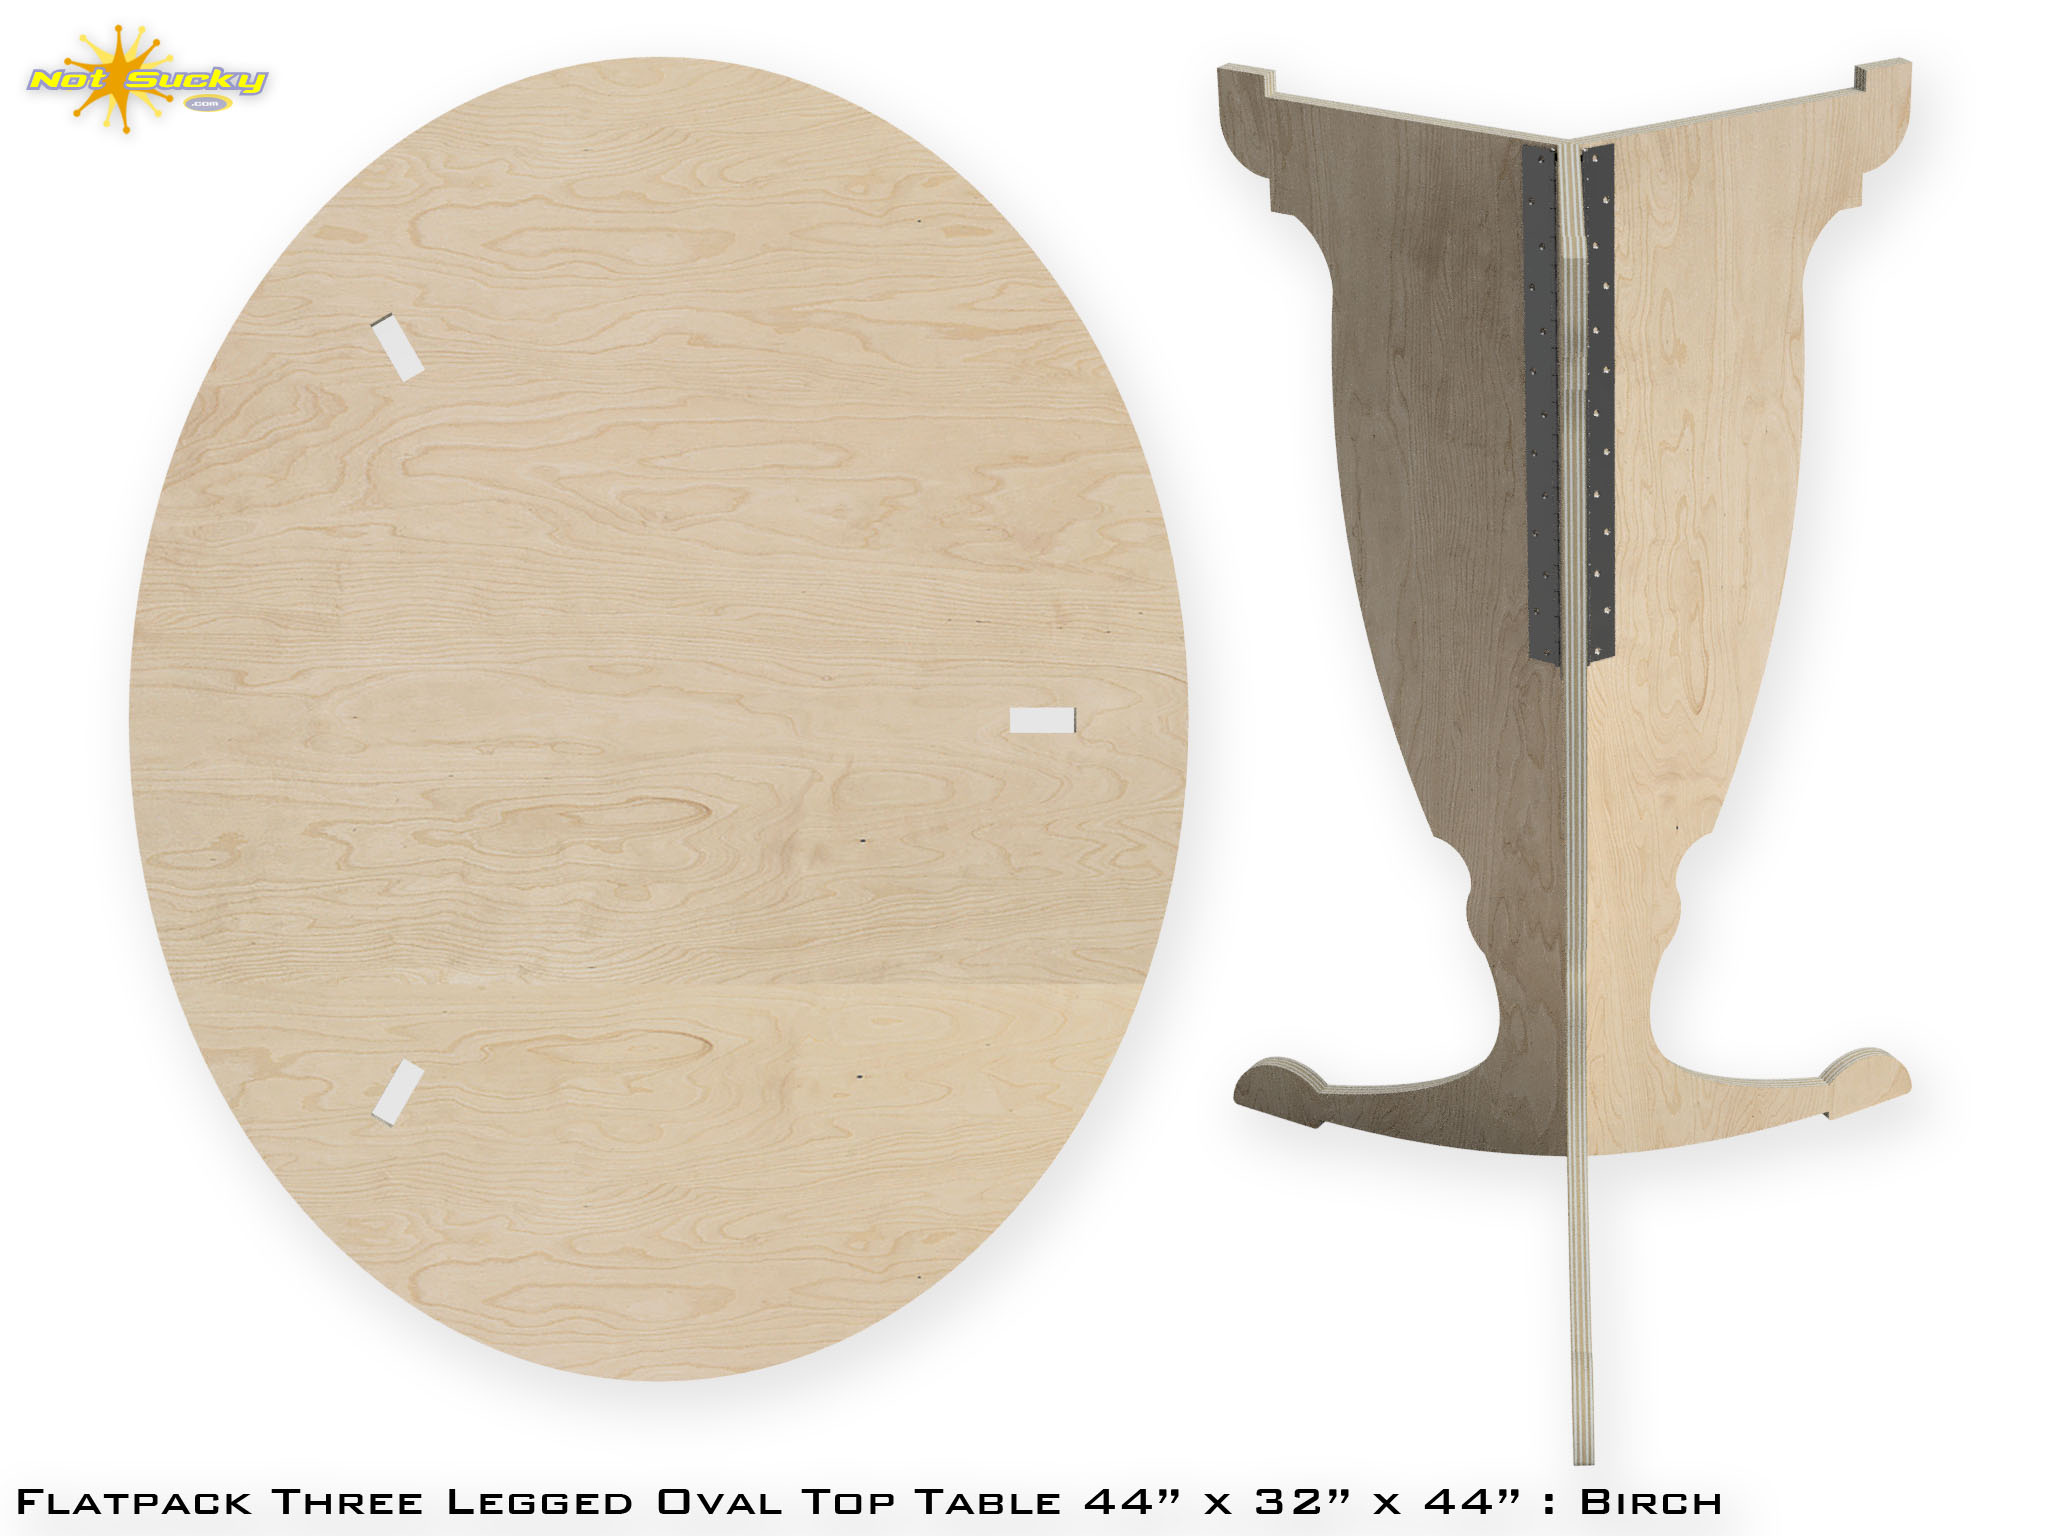 Round Flat Pack Table with Folding Legs